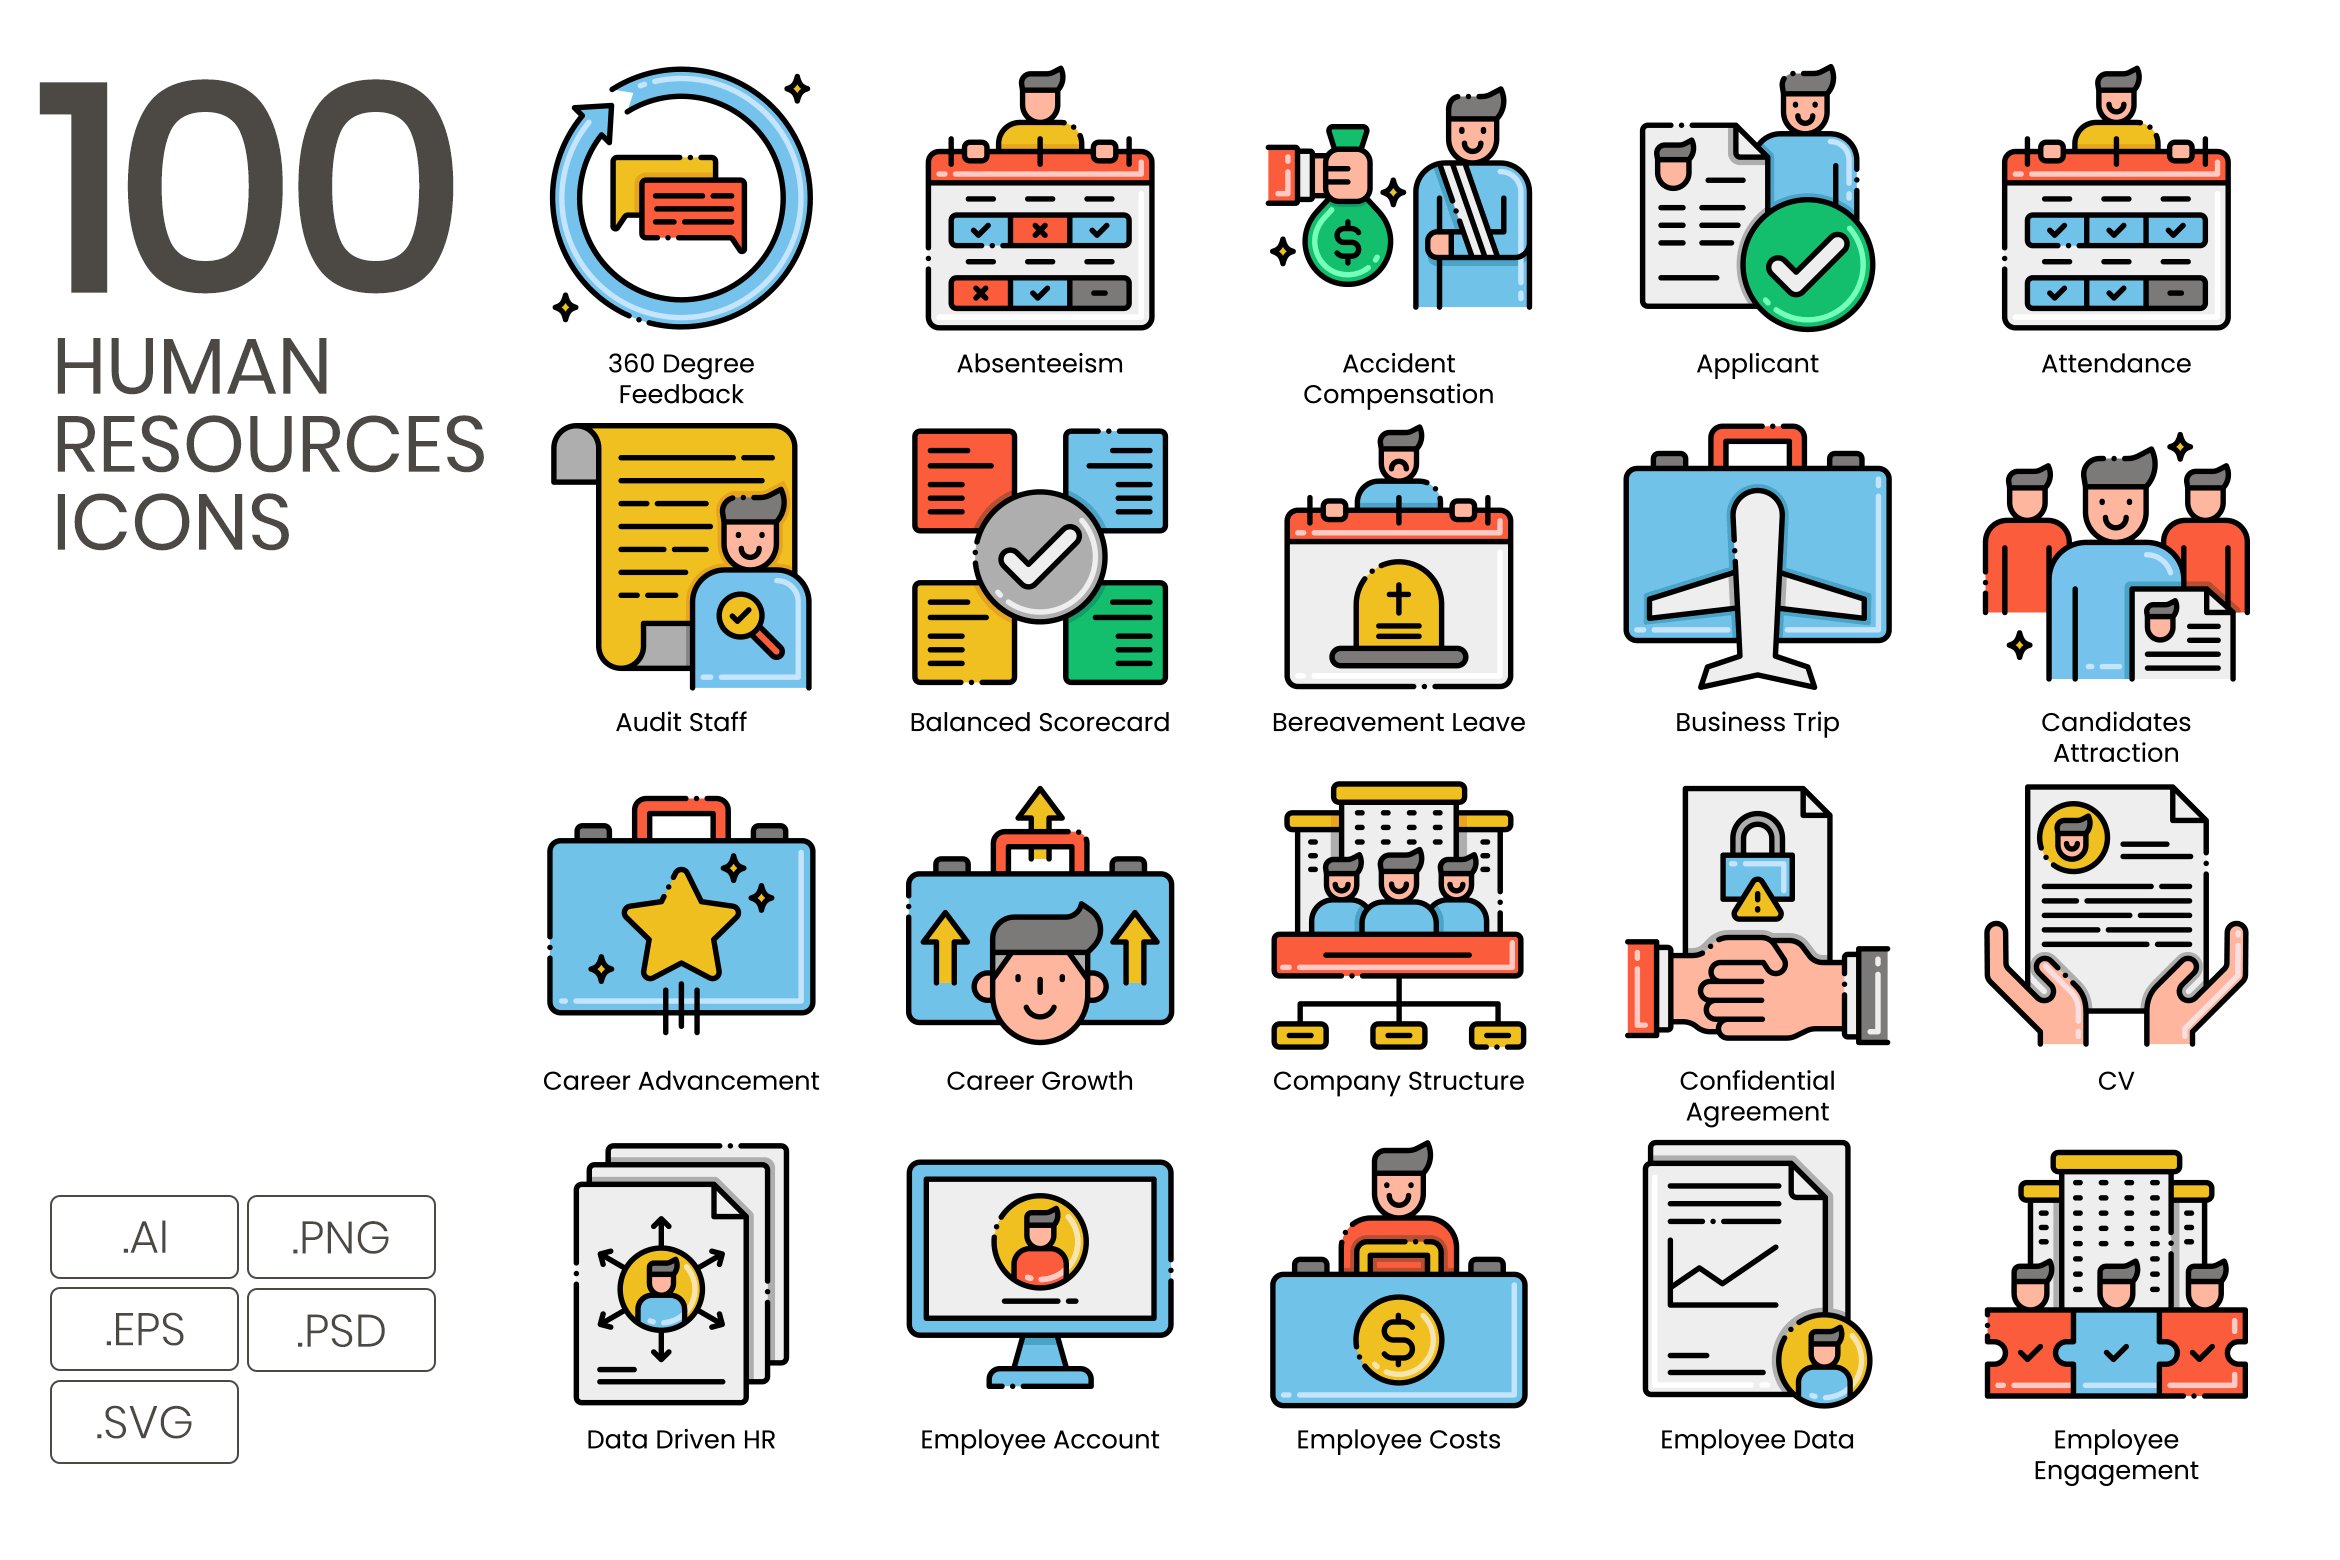 100 Human Resources Icons cover image.